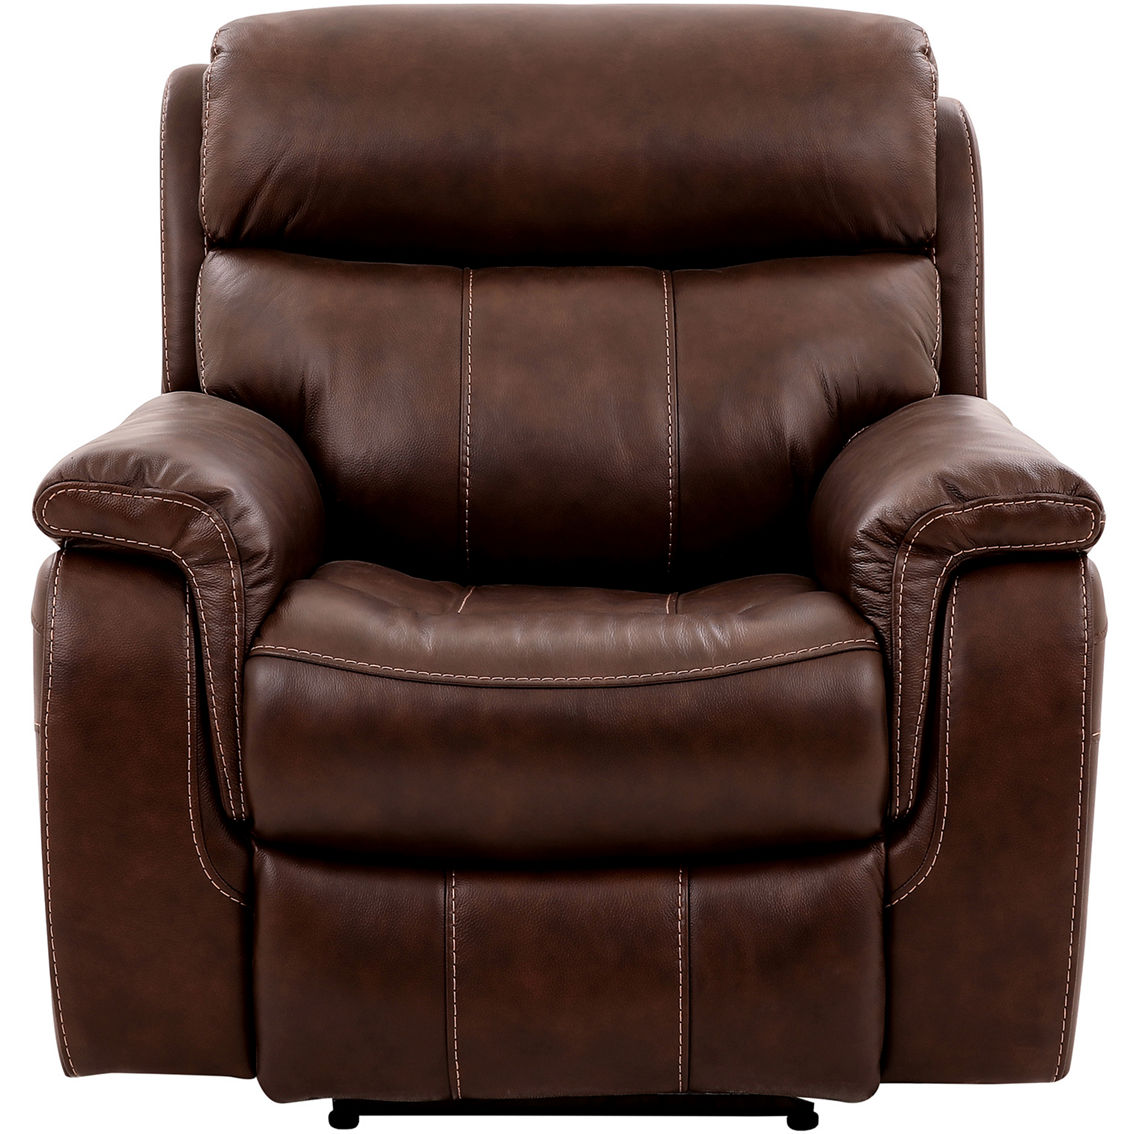 Armen Living Montague Dual Power Headrest and Lumbar Support Leather Recliner - Image 4 of 9